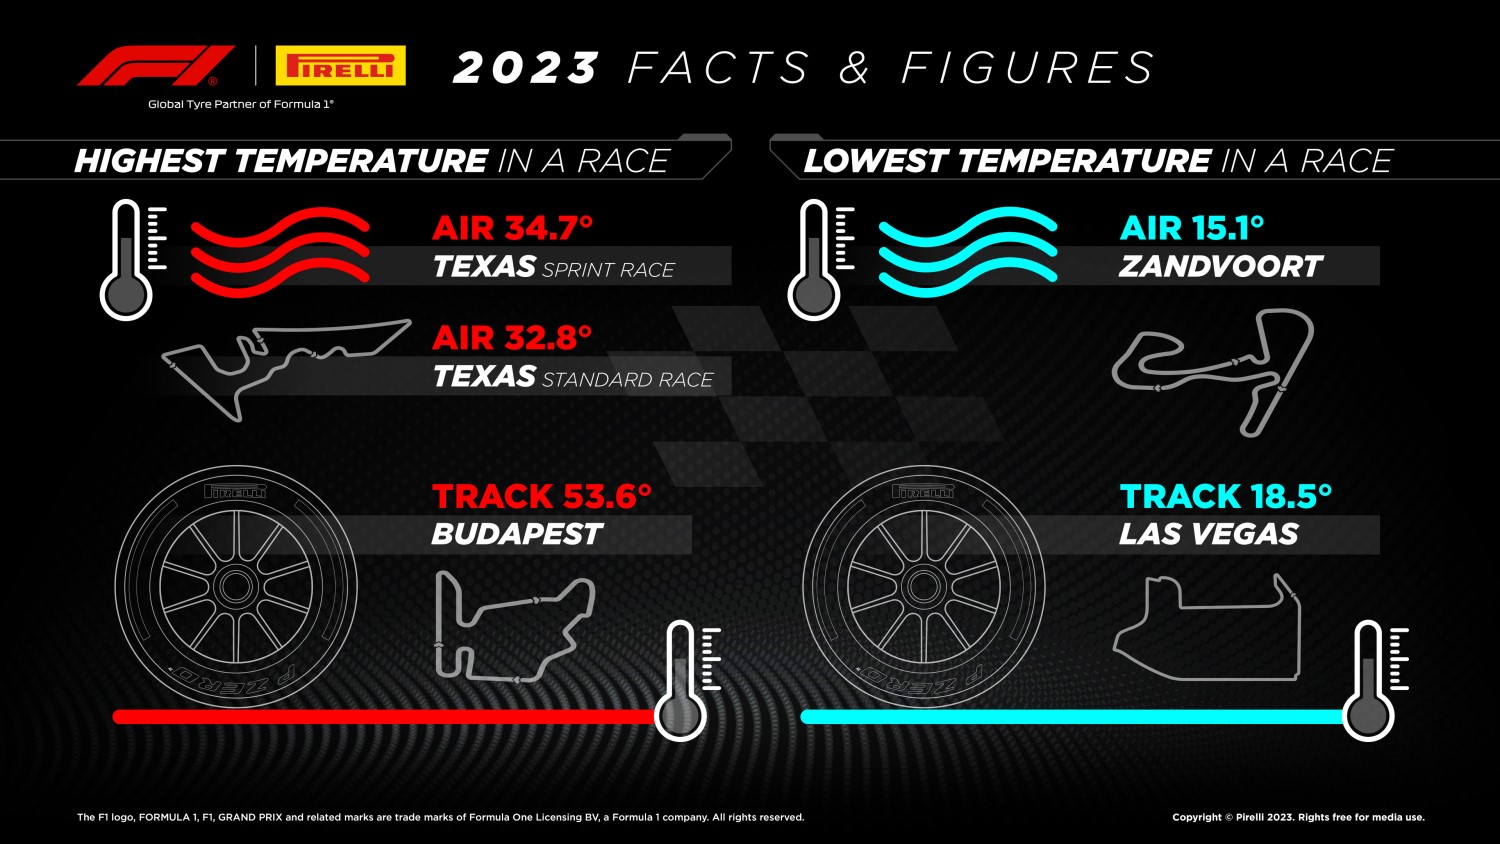 Pirelli 2023 Facts and Figures